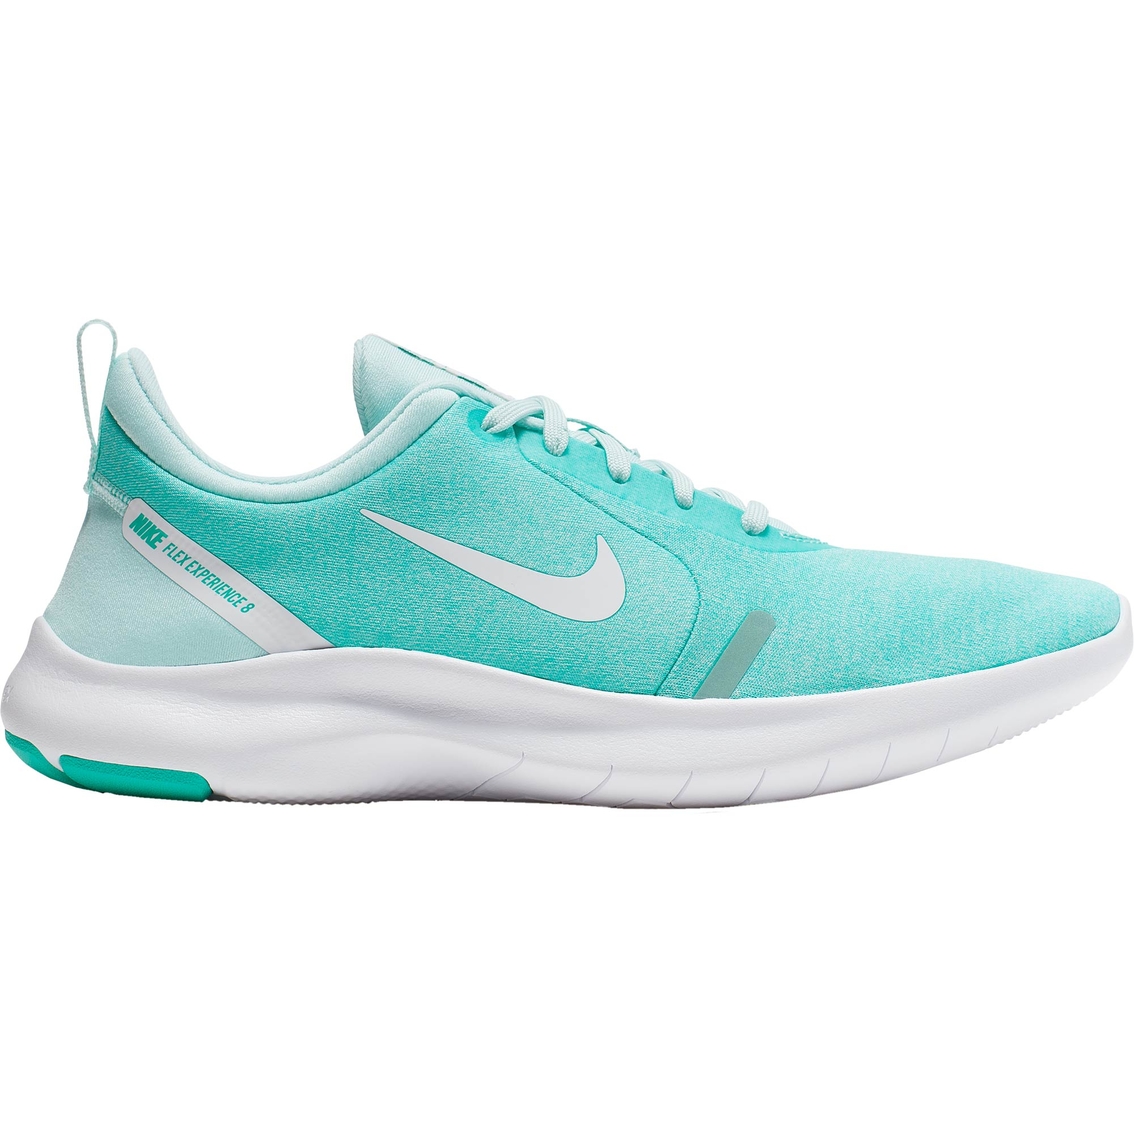 Nike Women's Flex Experience RN 8 Running Shoes - Image 2 of 6